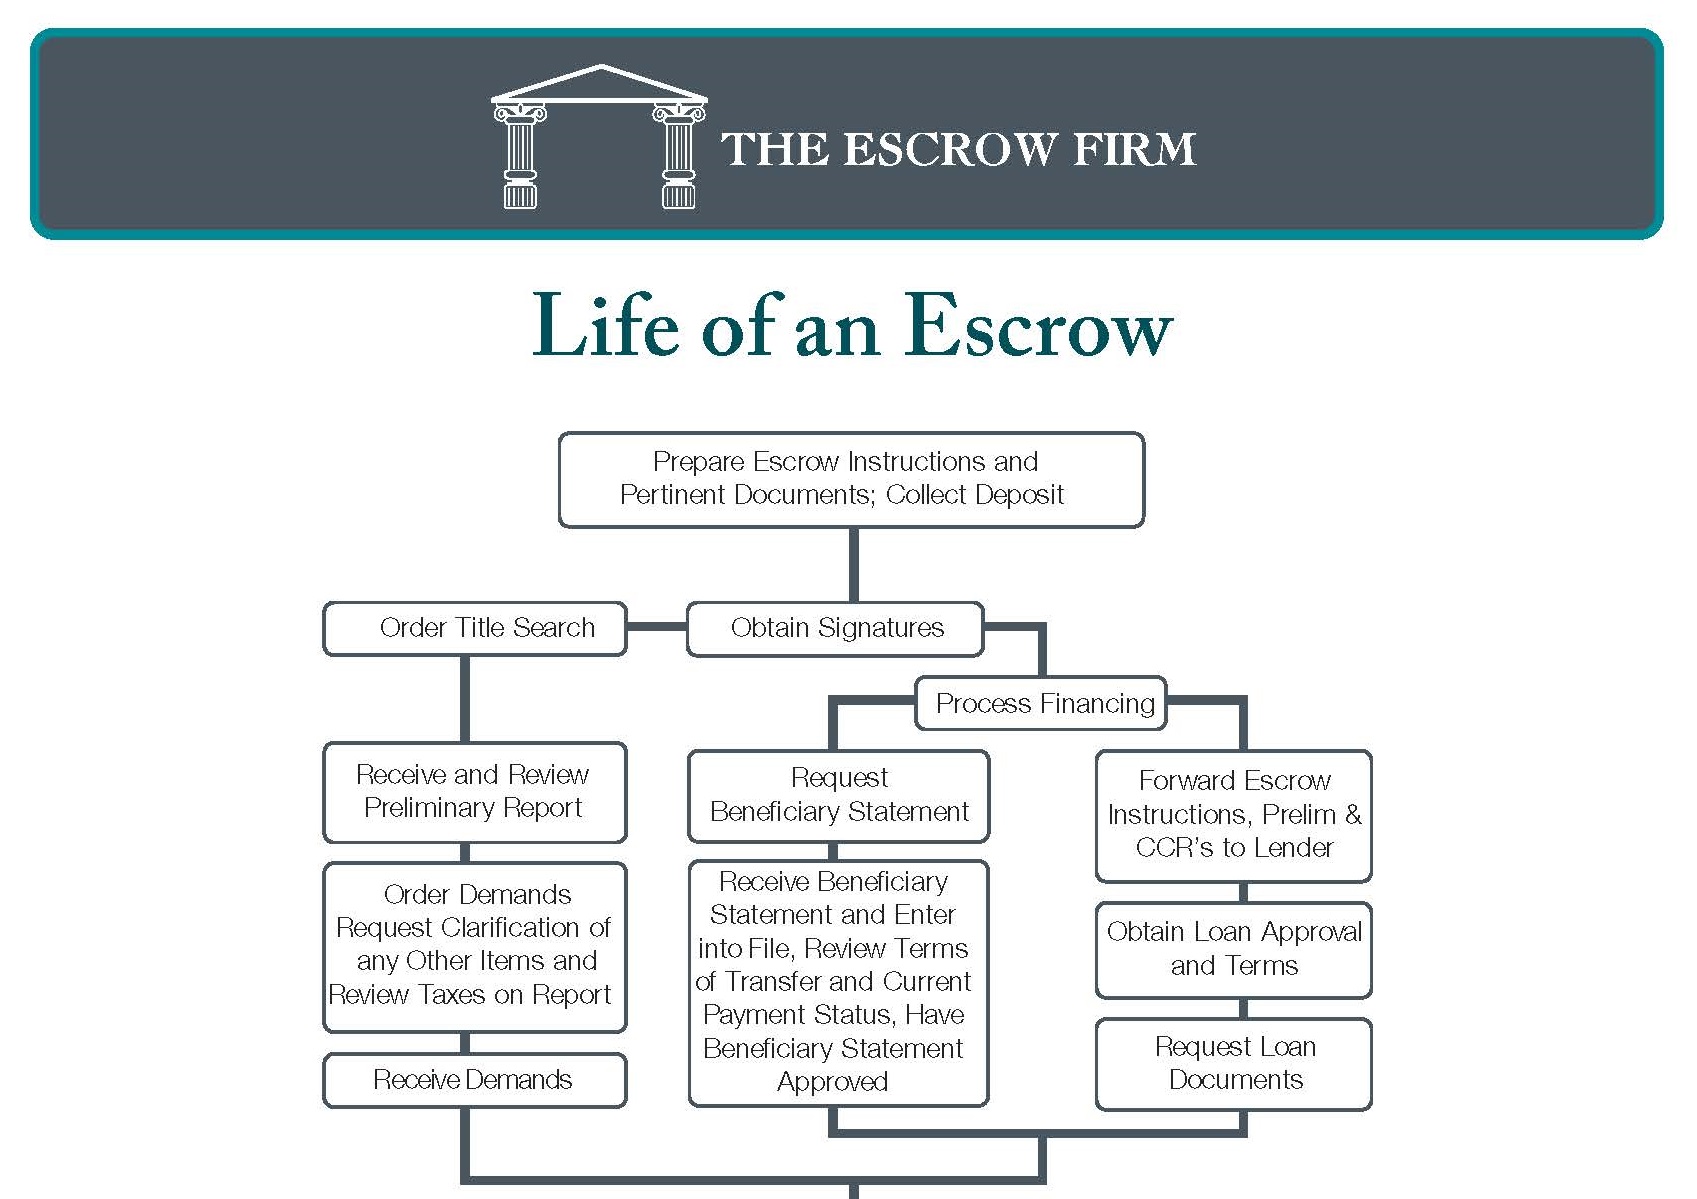 Life Of An Escrow Chart